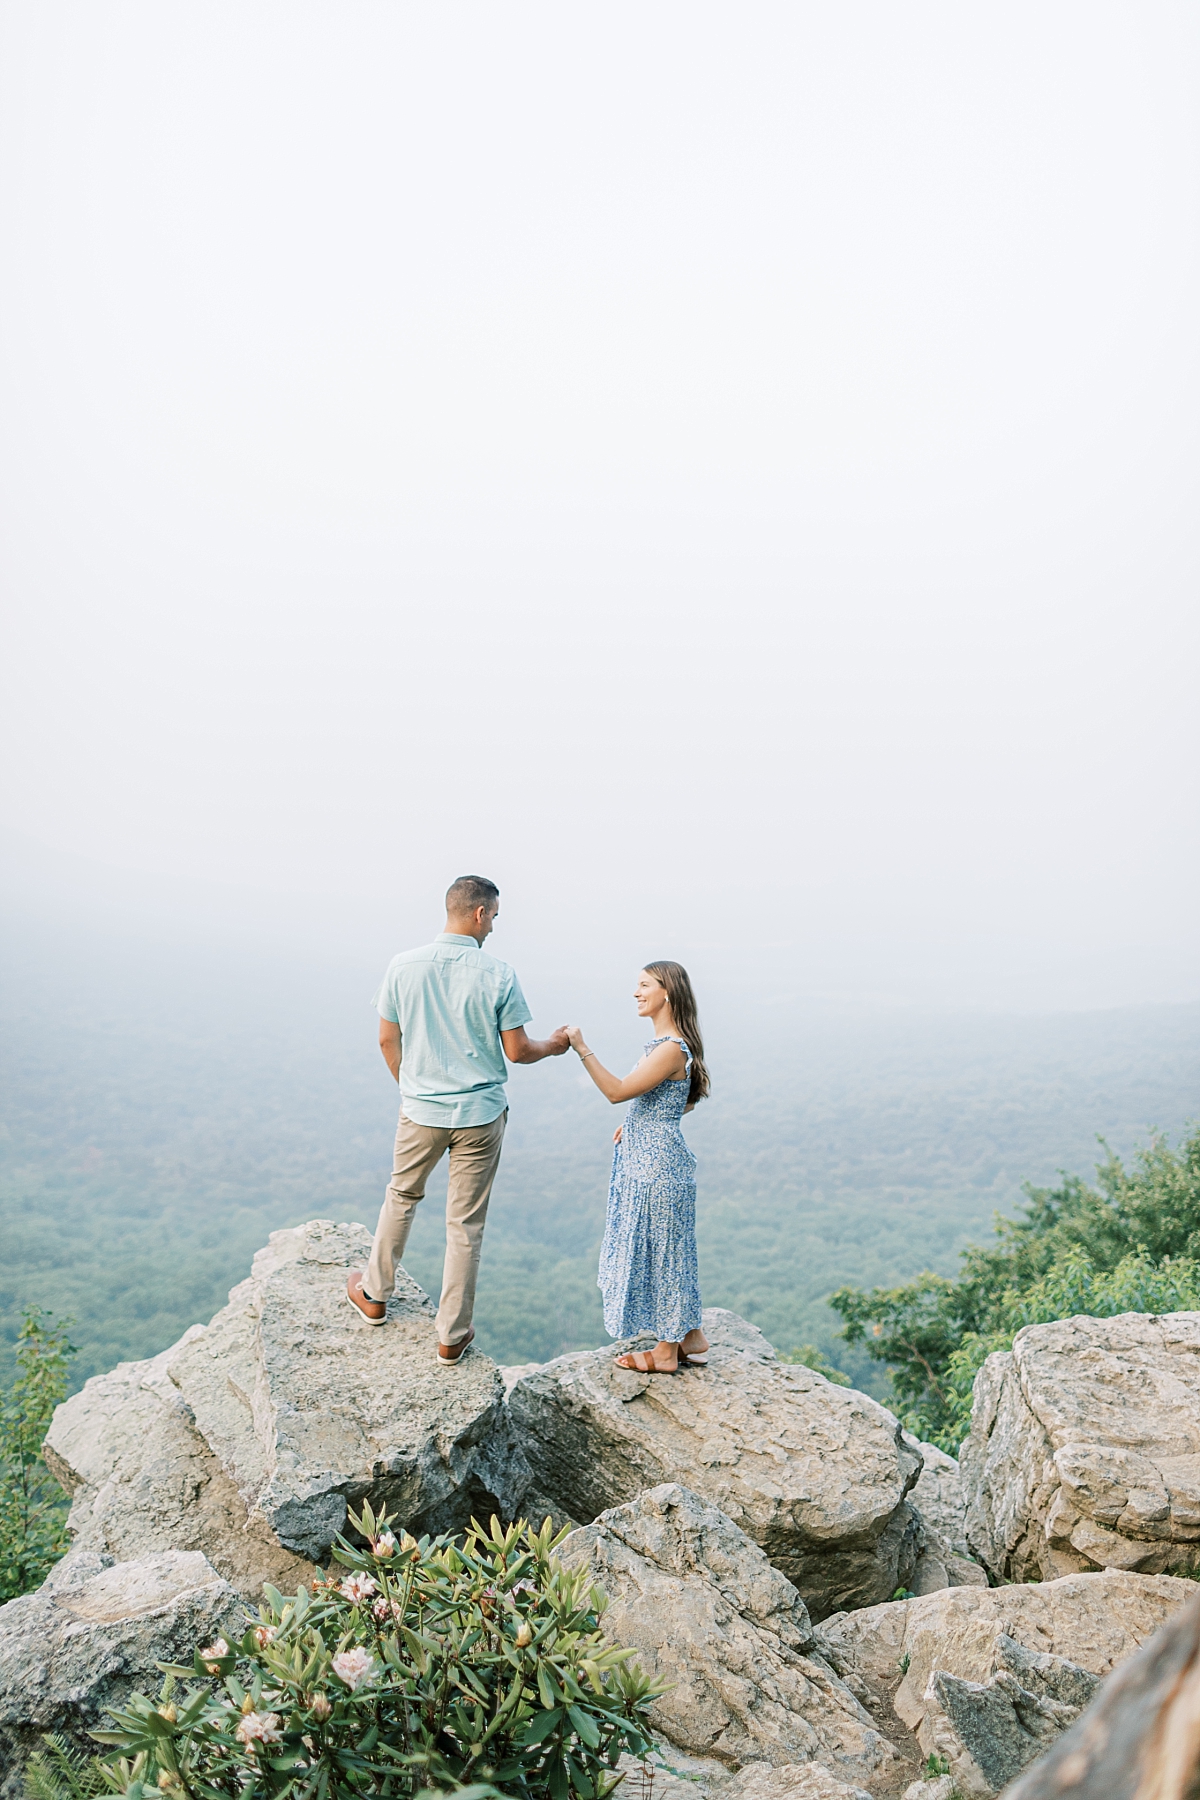 Engagement photo of a couple at Hawk Mountain Sanctuary in PA. The couple stands on rocks with a beautiful view